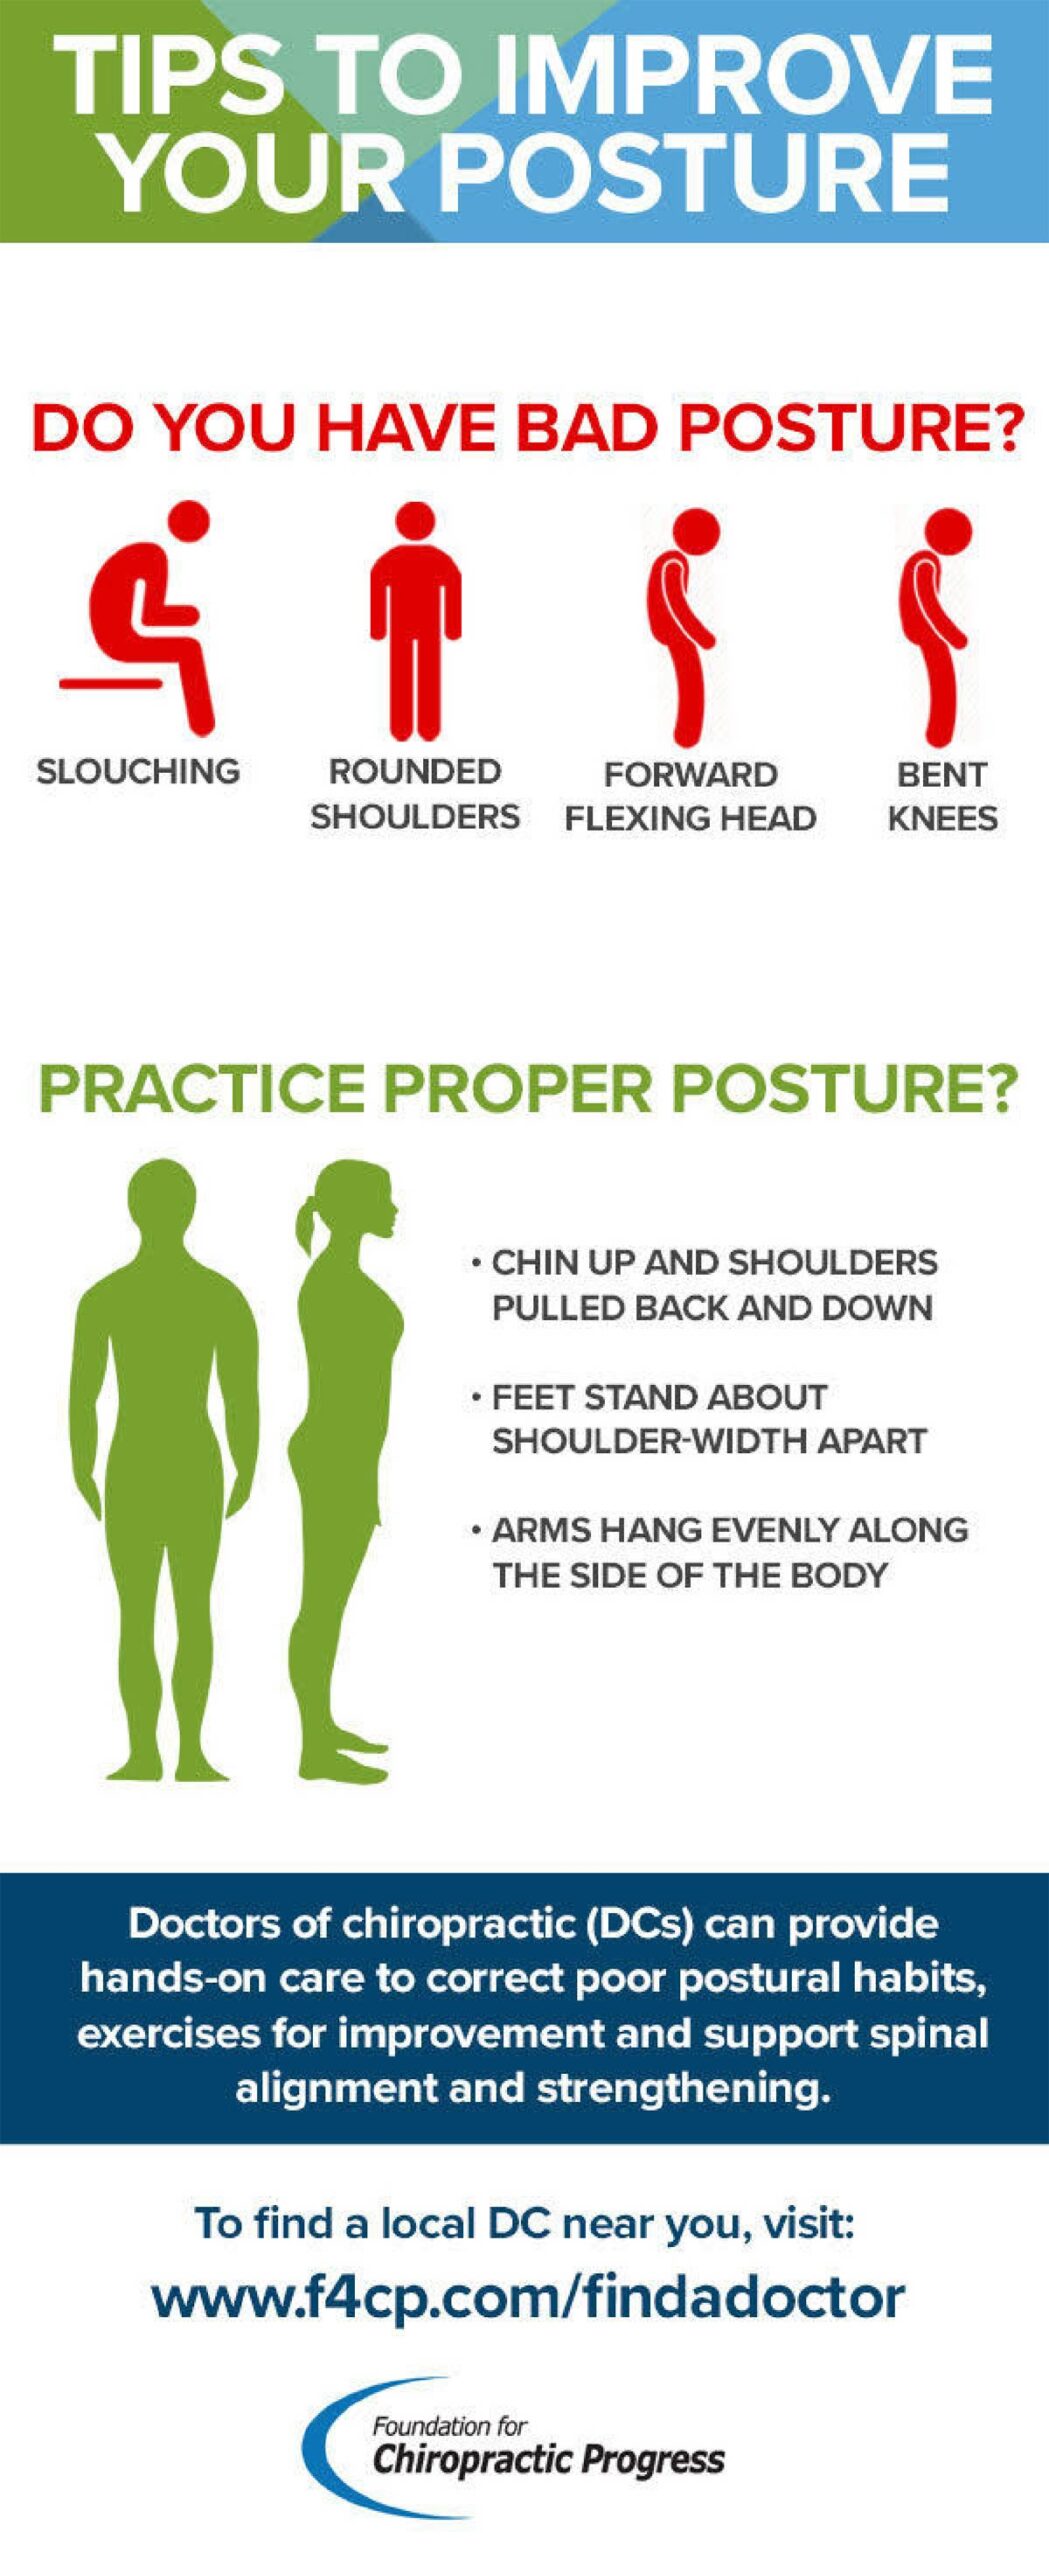 Does Posture Have You in a Bad Slump?